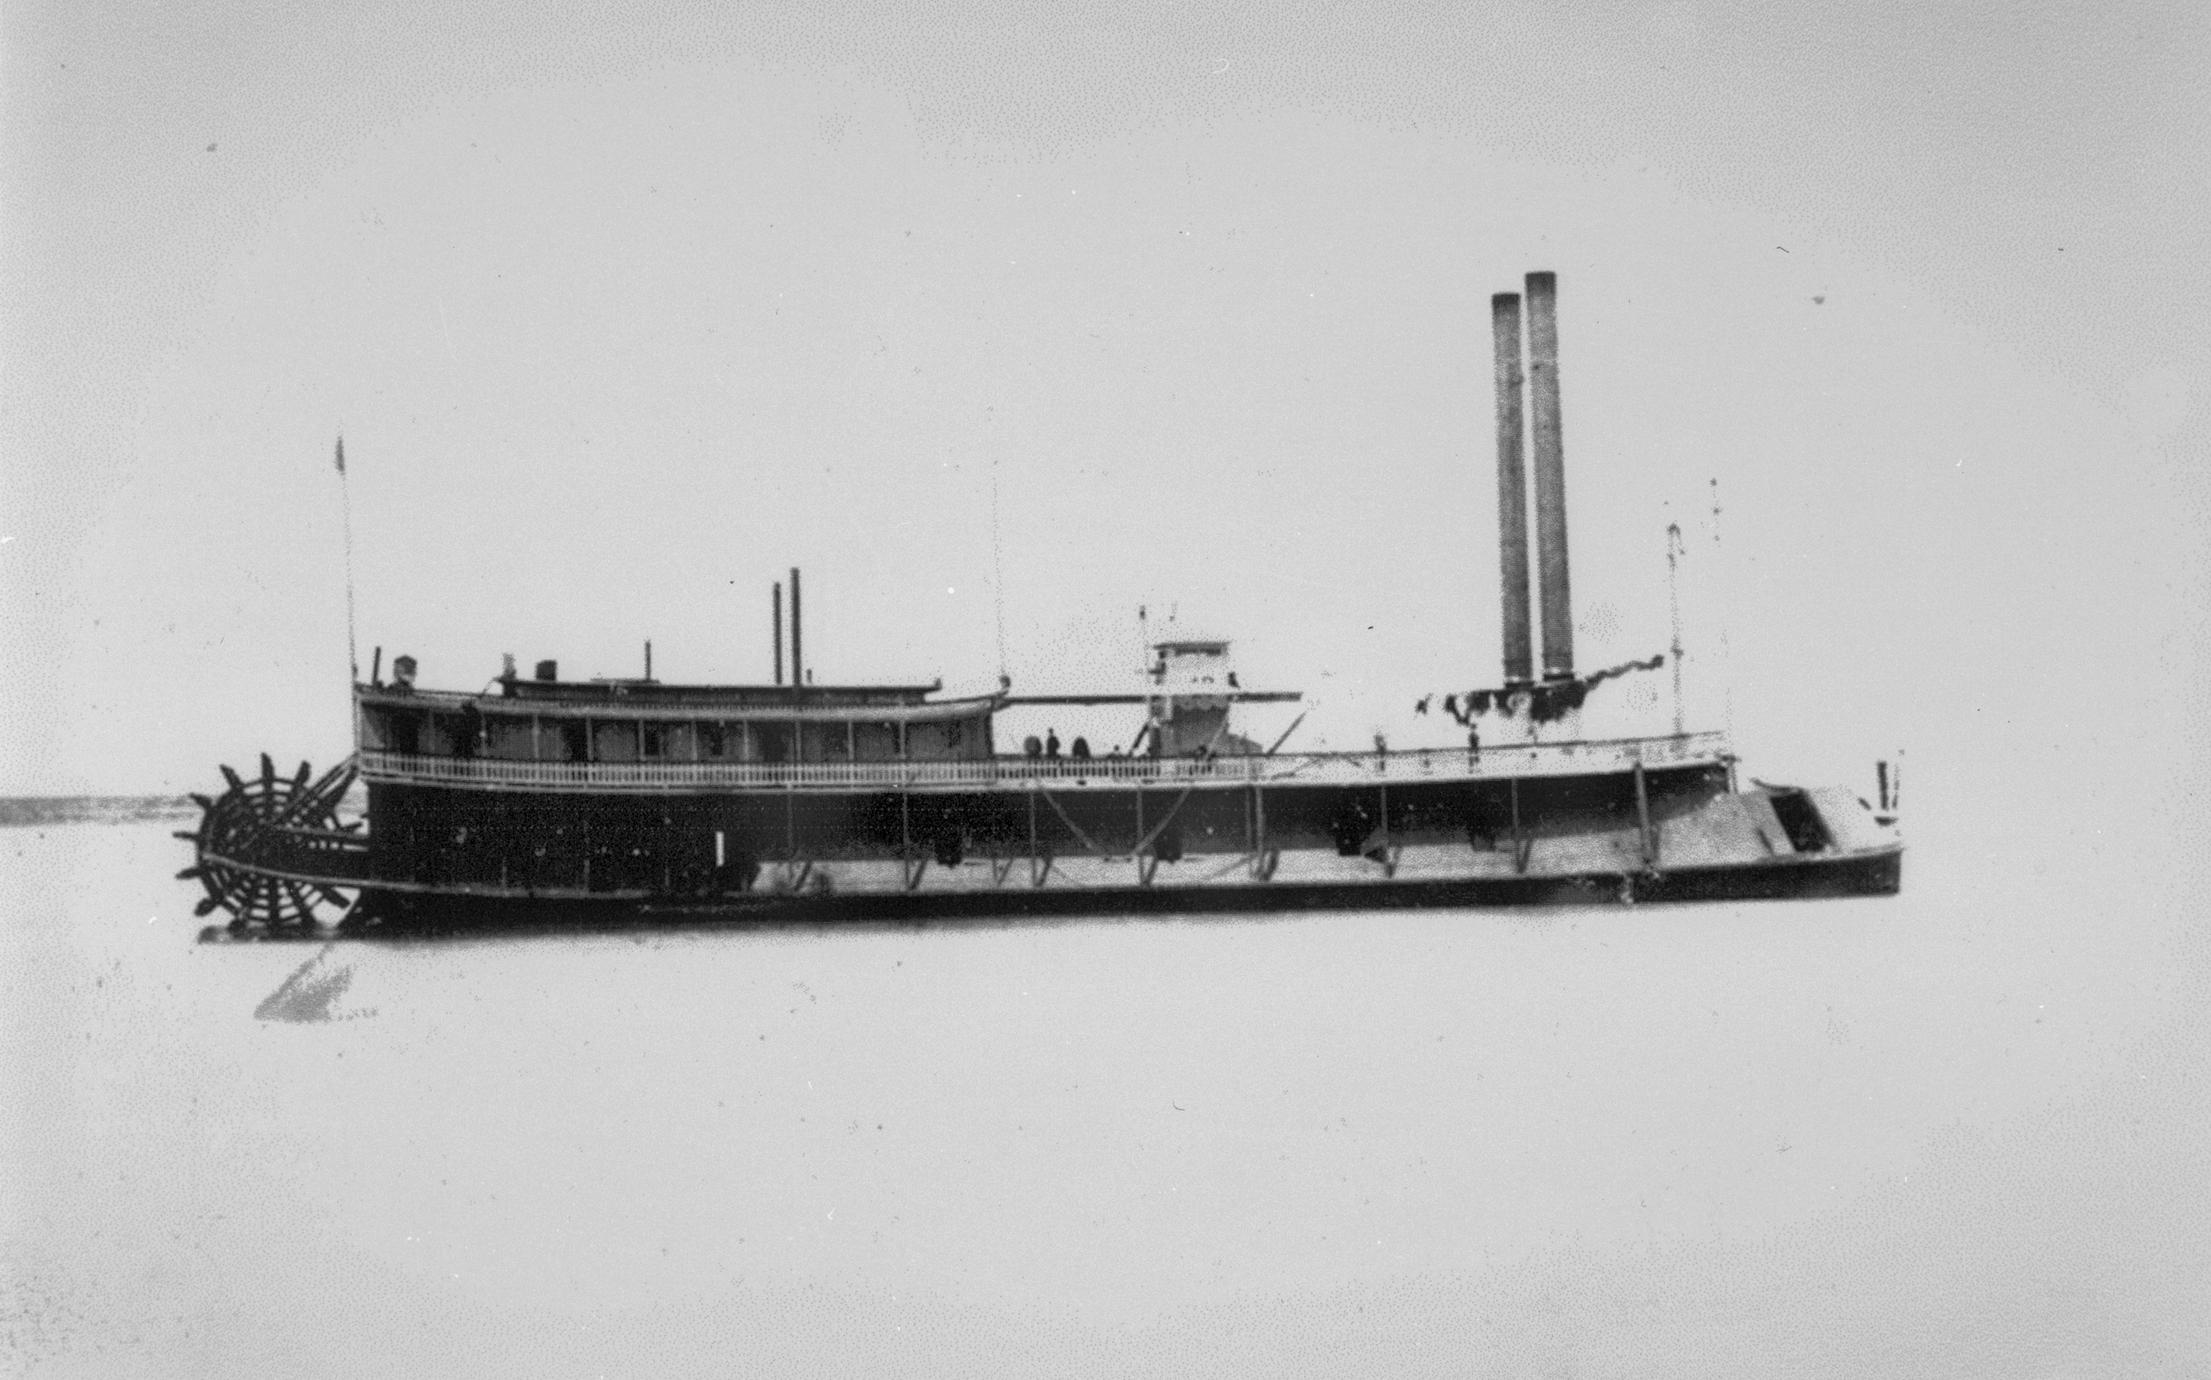 Curlew (Packet/Gunboat, 1862-1865)